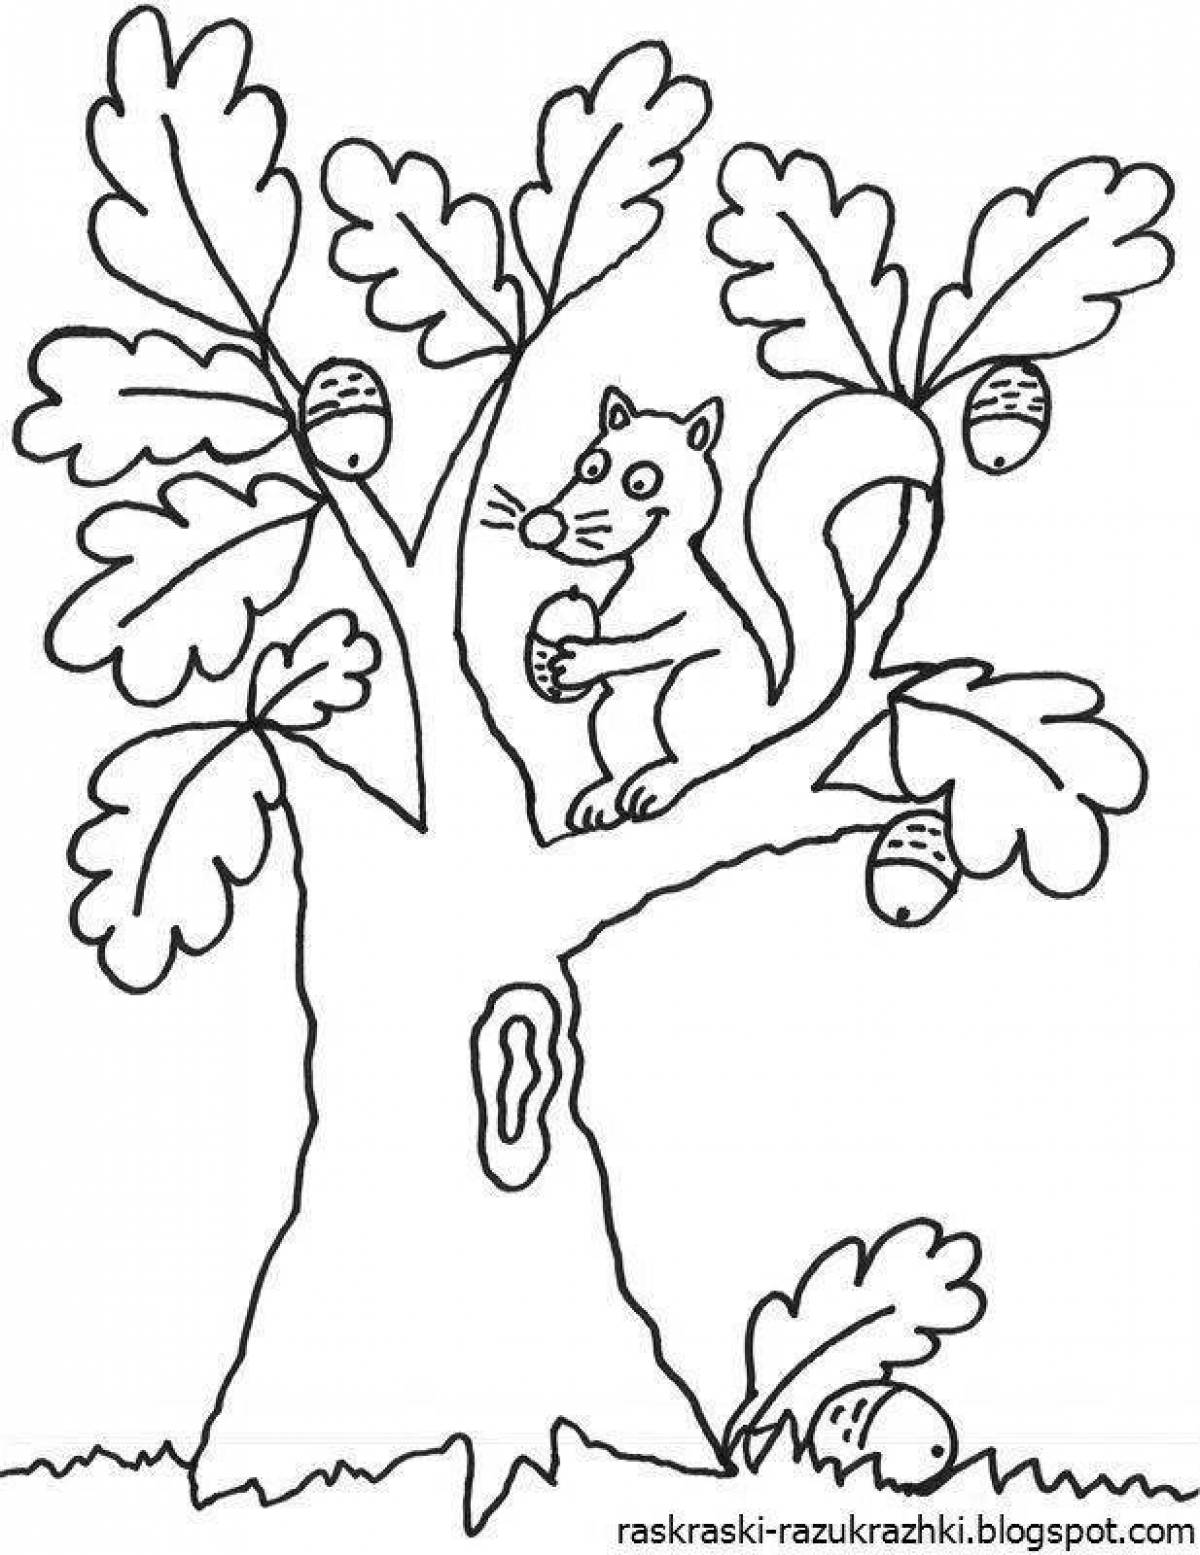 Coloring page quiet autumn forest